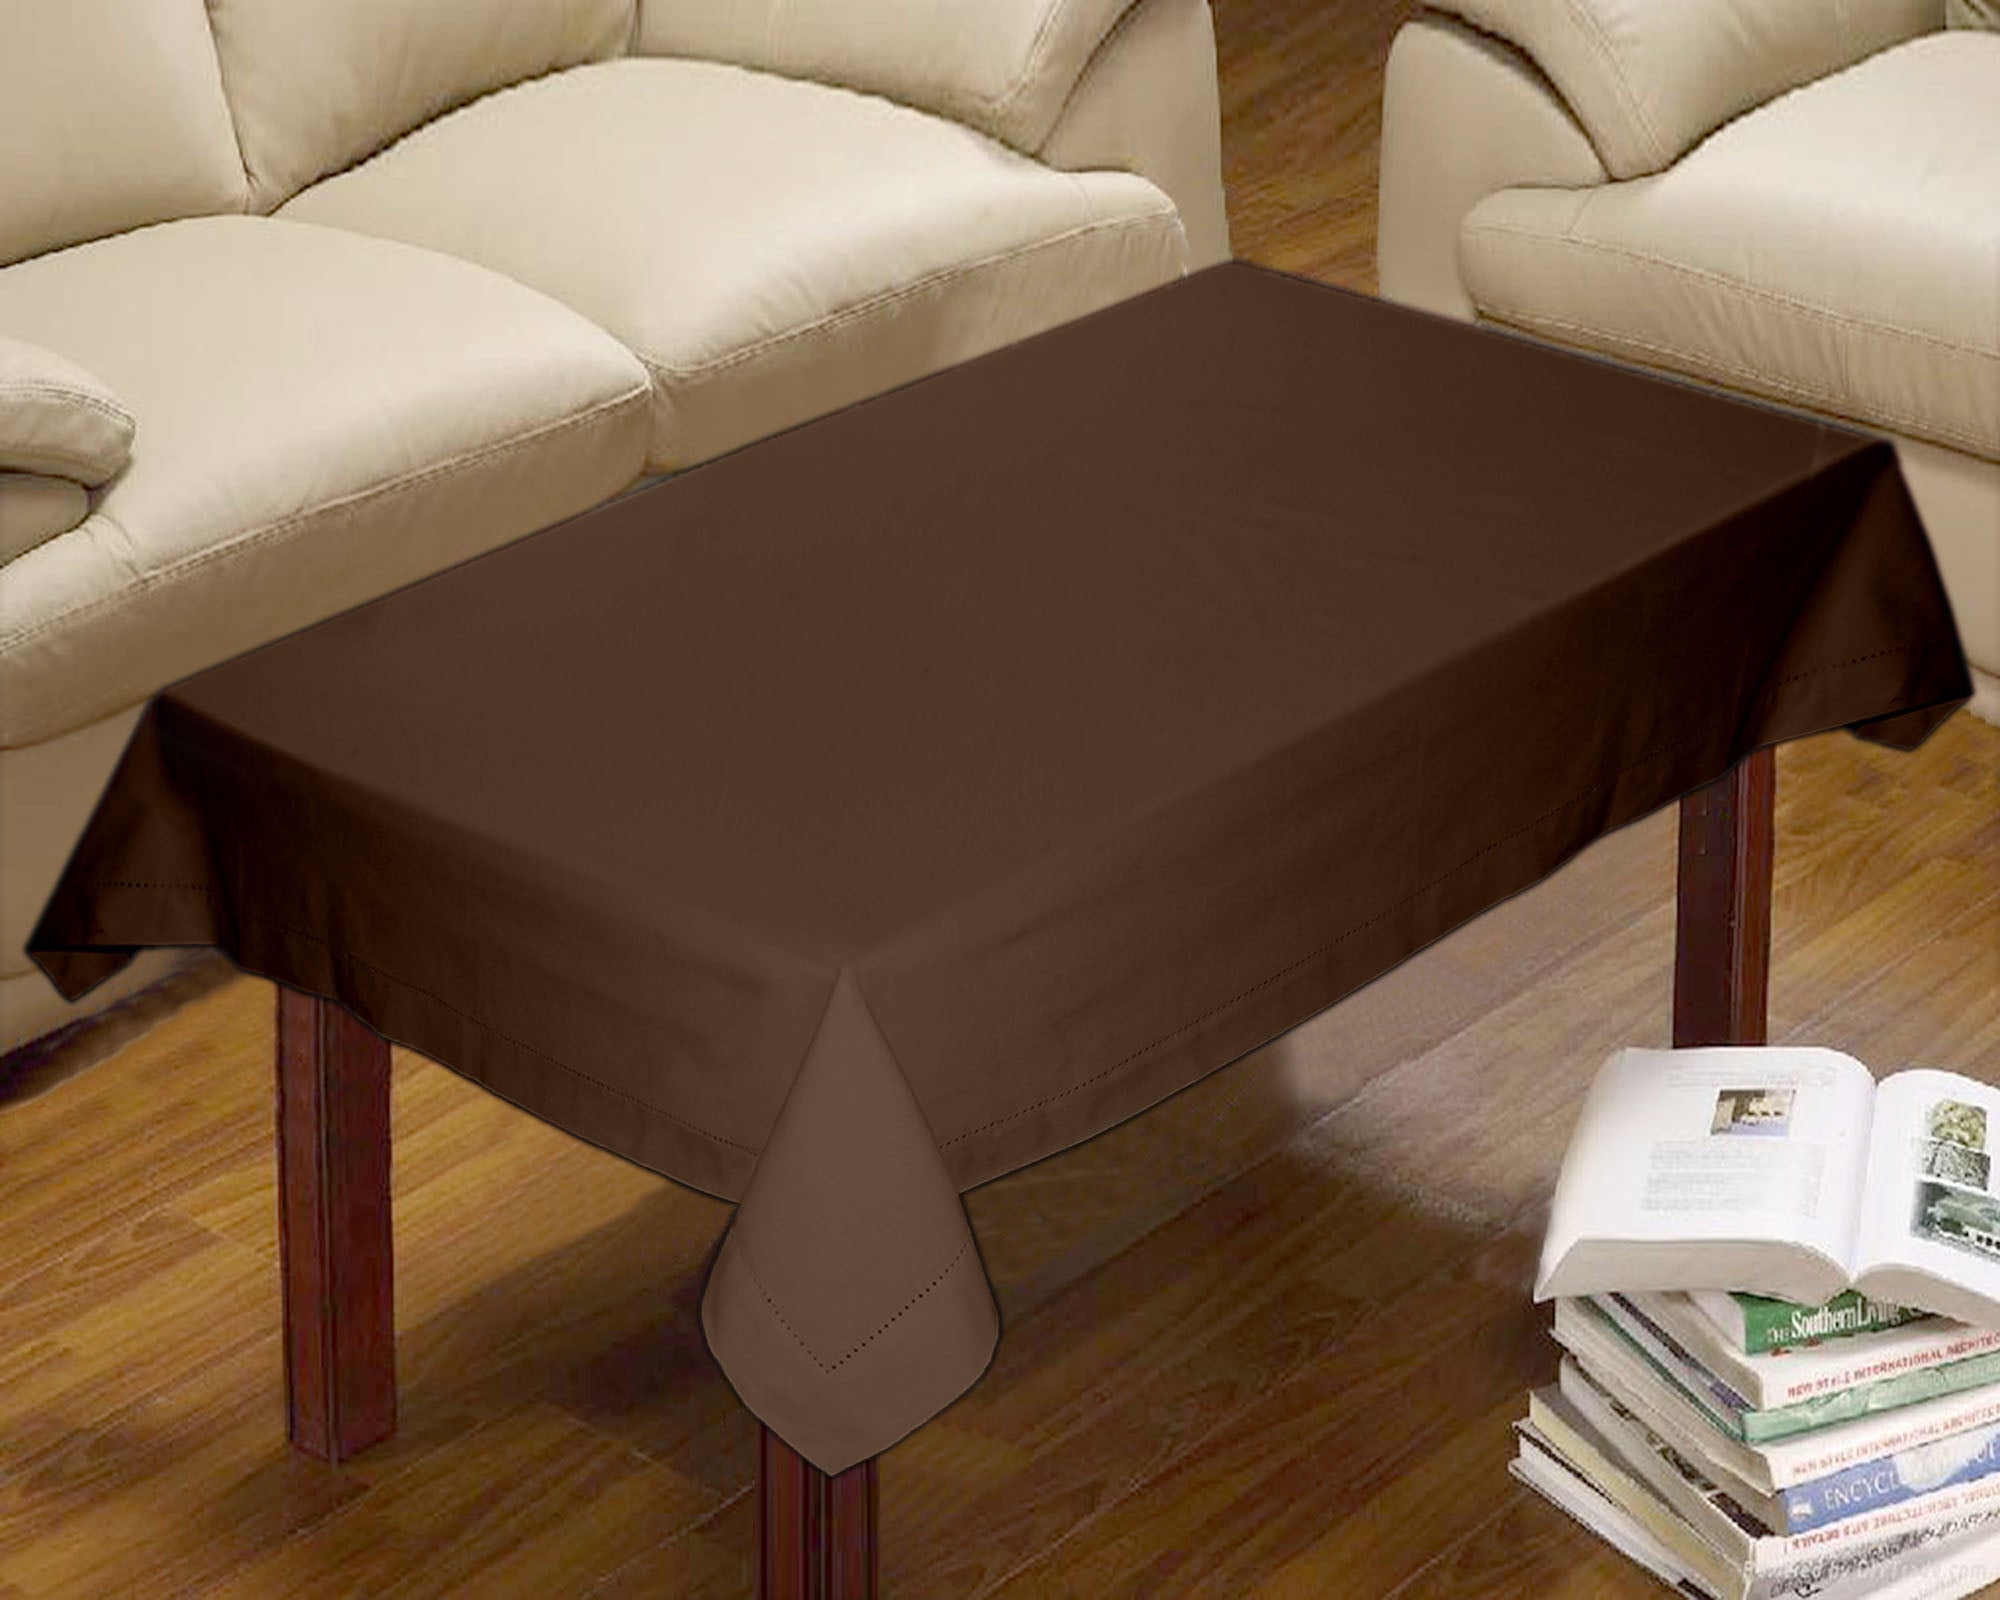 Lushomes center table cover, Cotton Brown Plain Dining Table Cover Cloth (Size 36 x 60 Inches, Center Table Cloth)